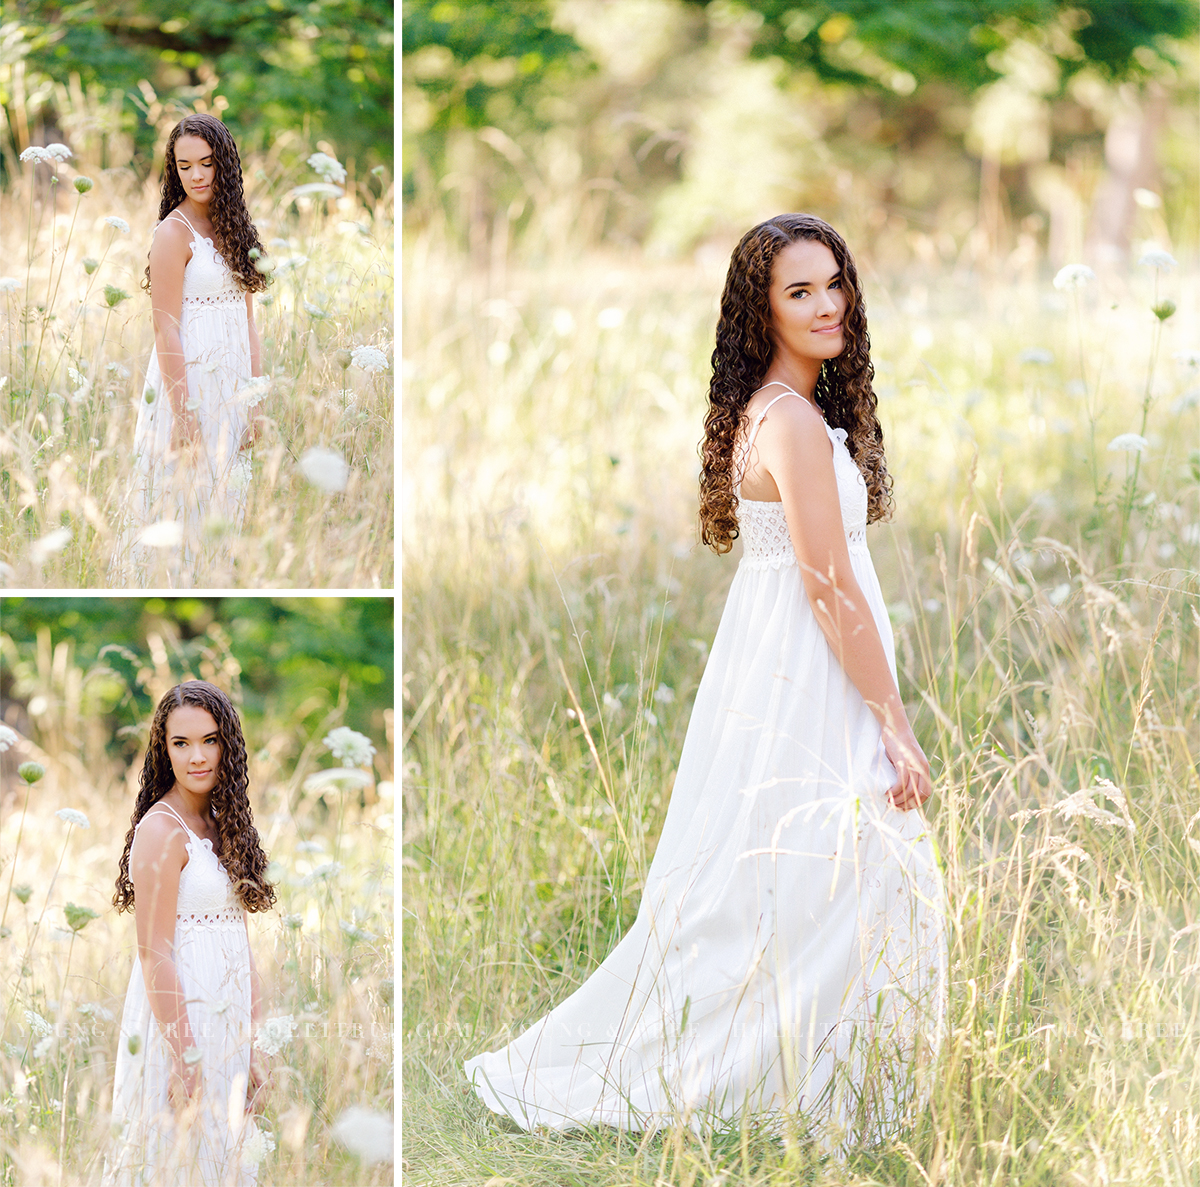 Gorgeous Corvallis Senior Session in a lush, natural park in Eugene, Oregon | Holli True Photography